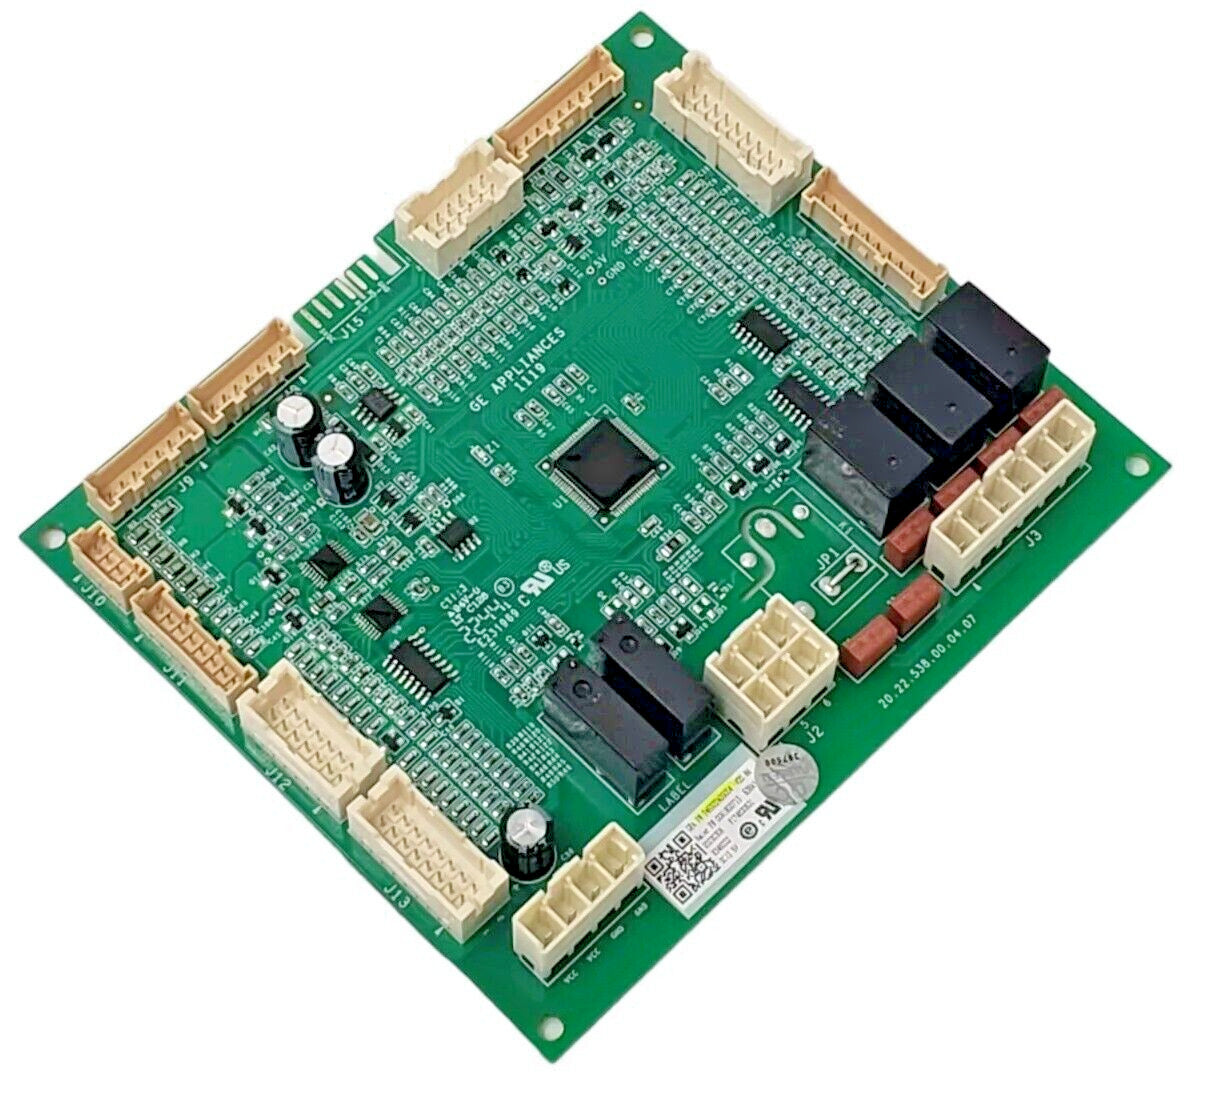 OEM Replacement for GE Fridge Control 245D2240G004